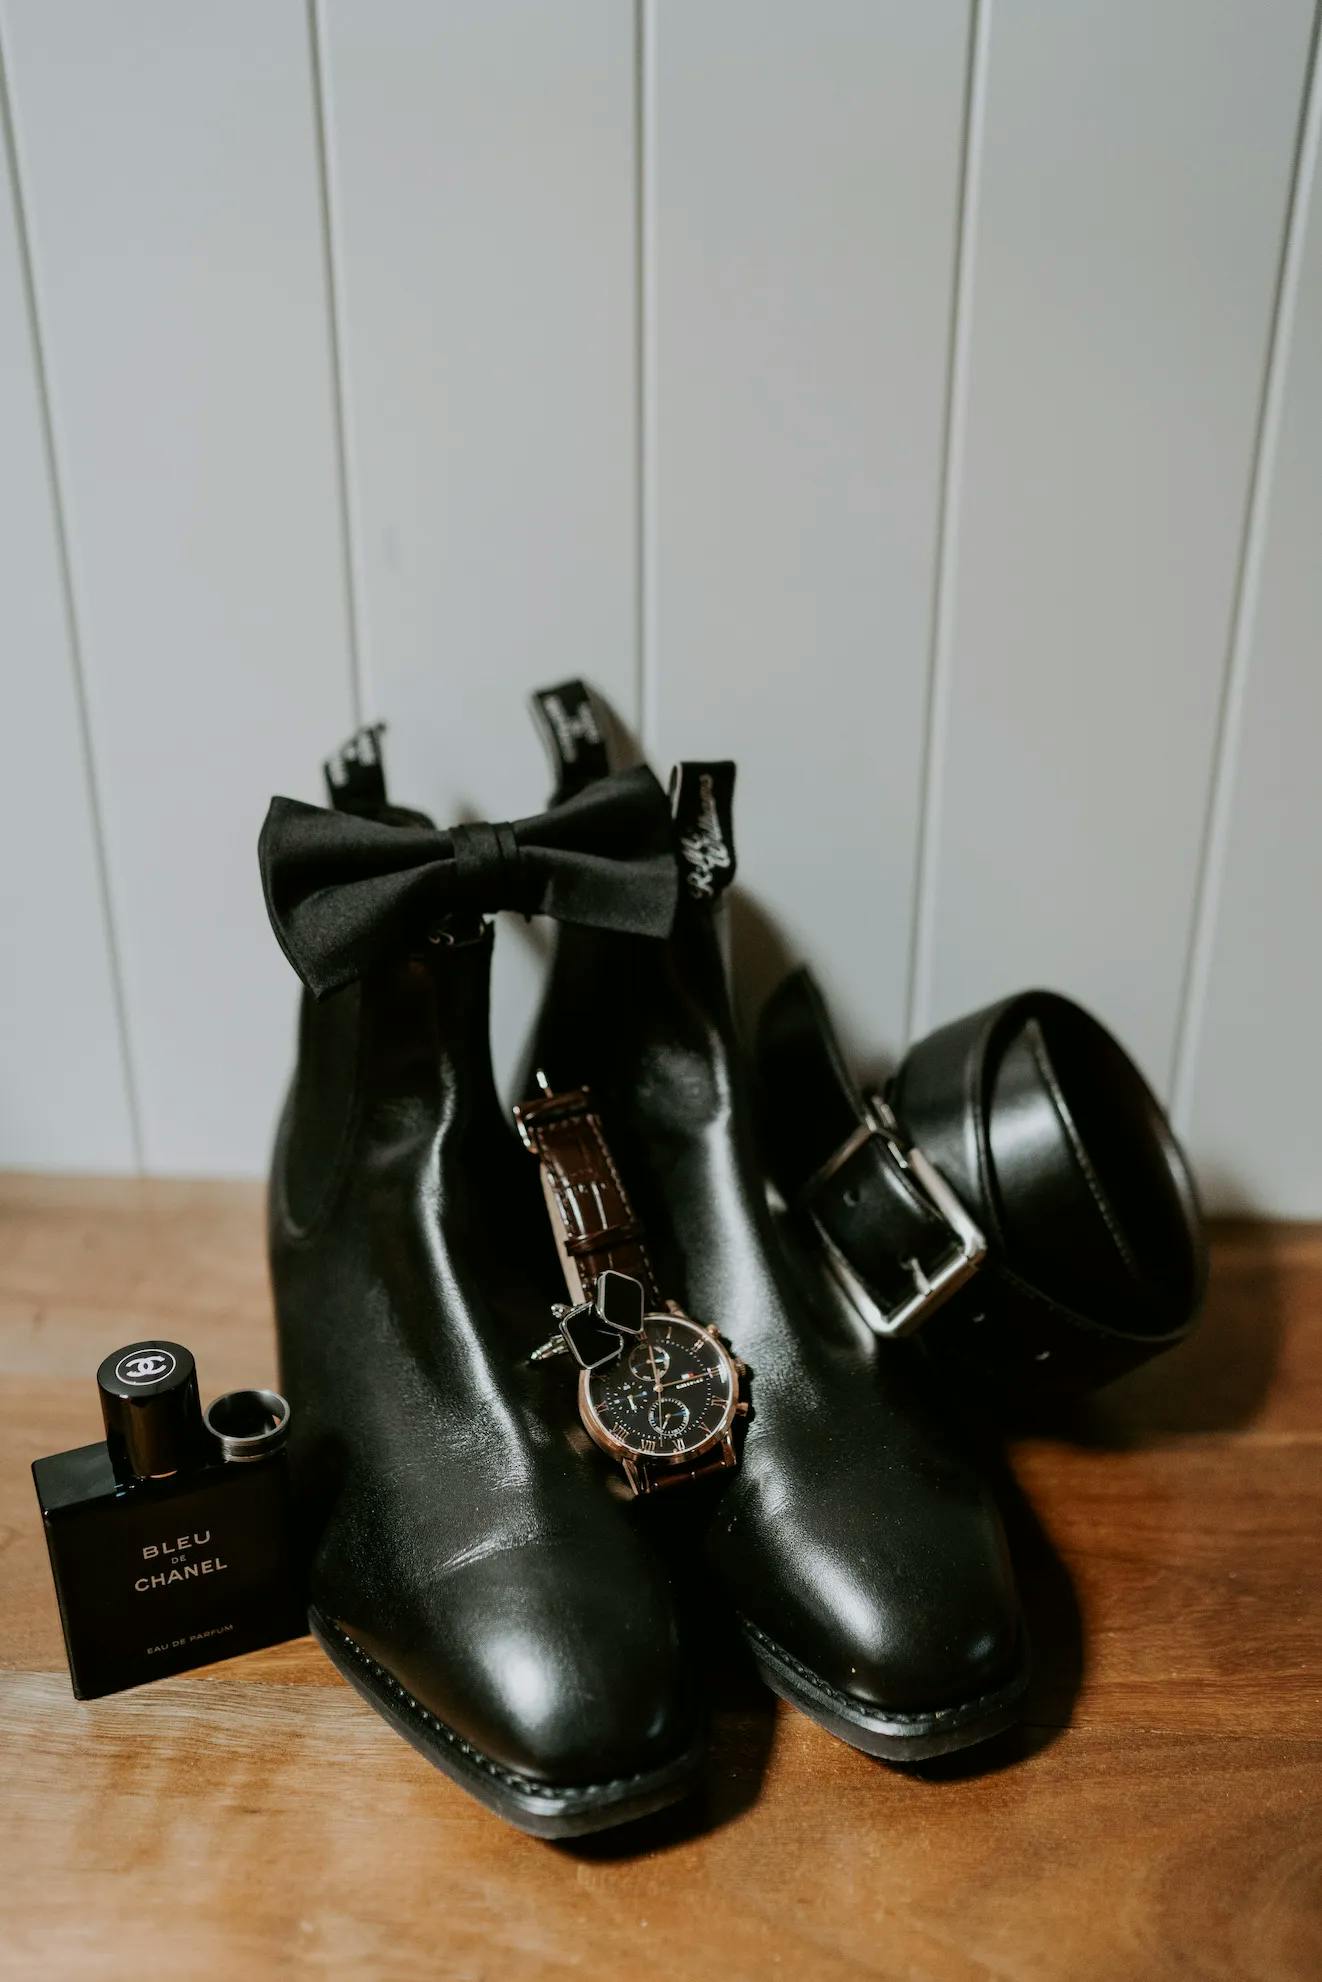 Groom shoes, watch and belt